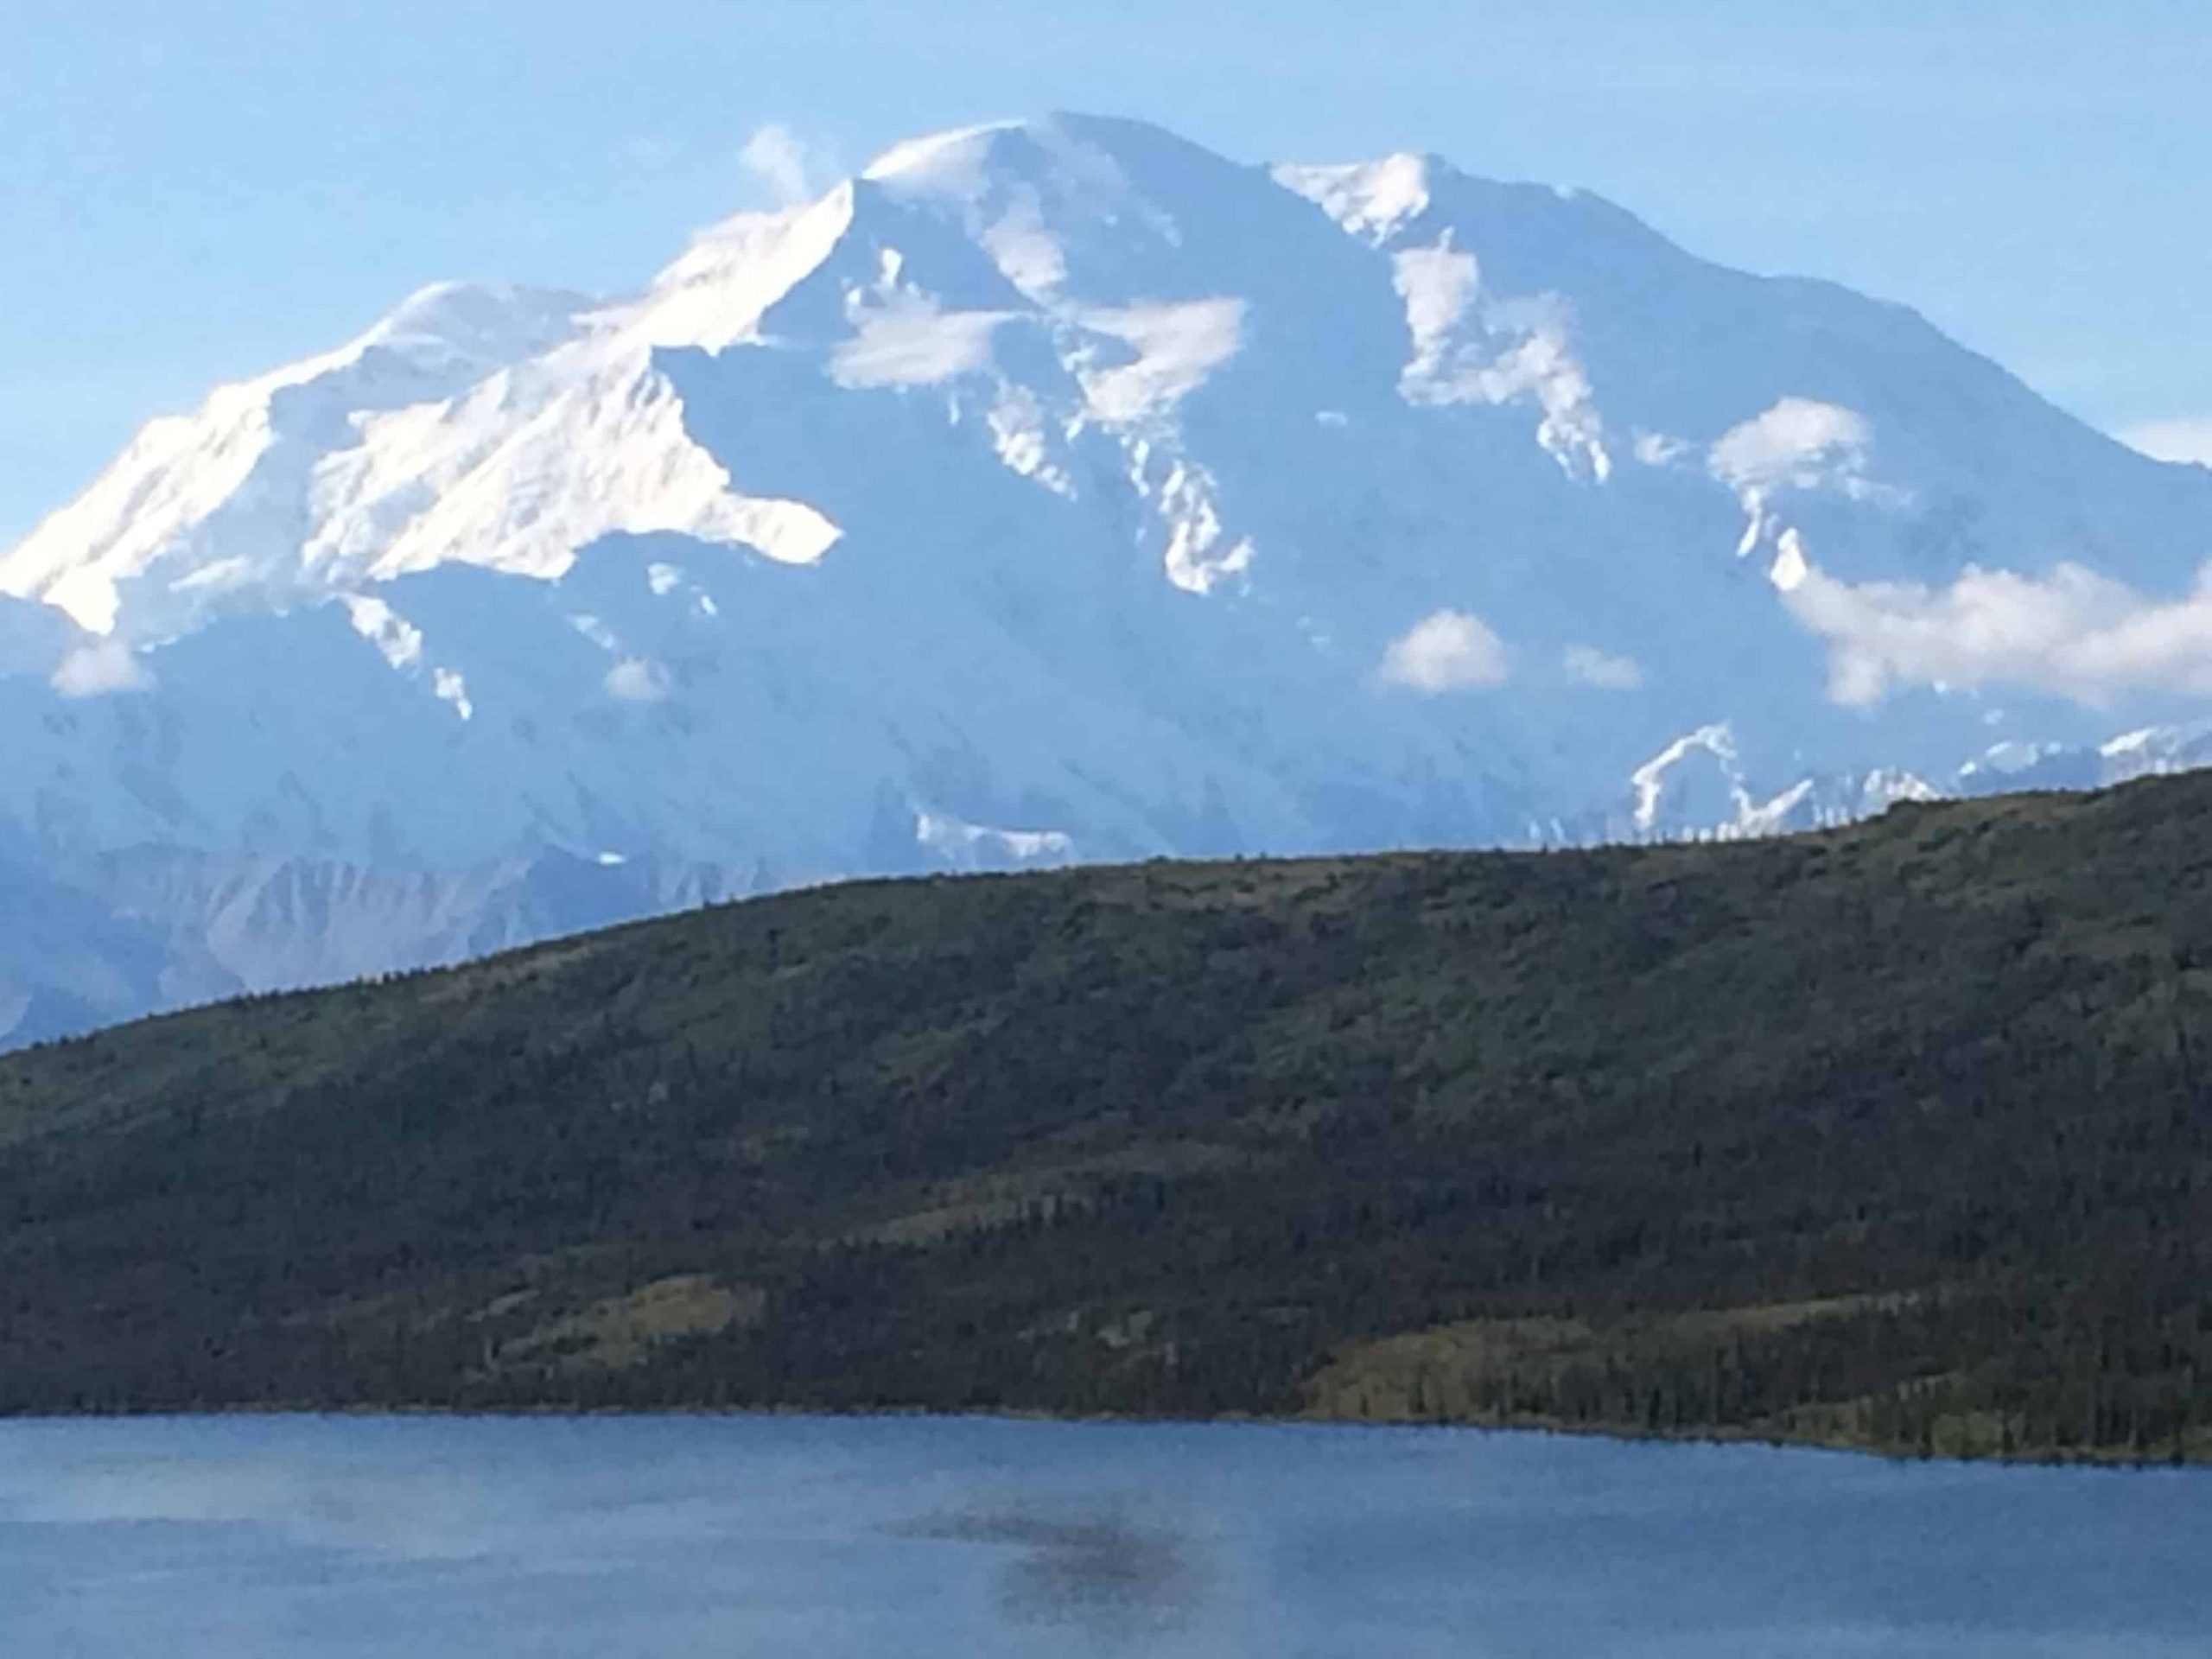 Snow-covered Denali mountain on a beautiful sunny day.